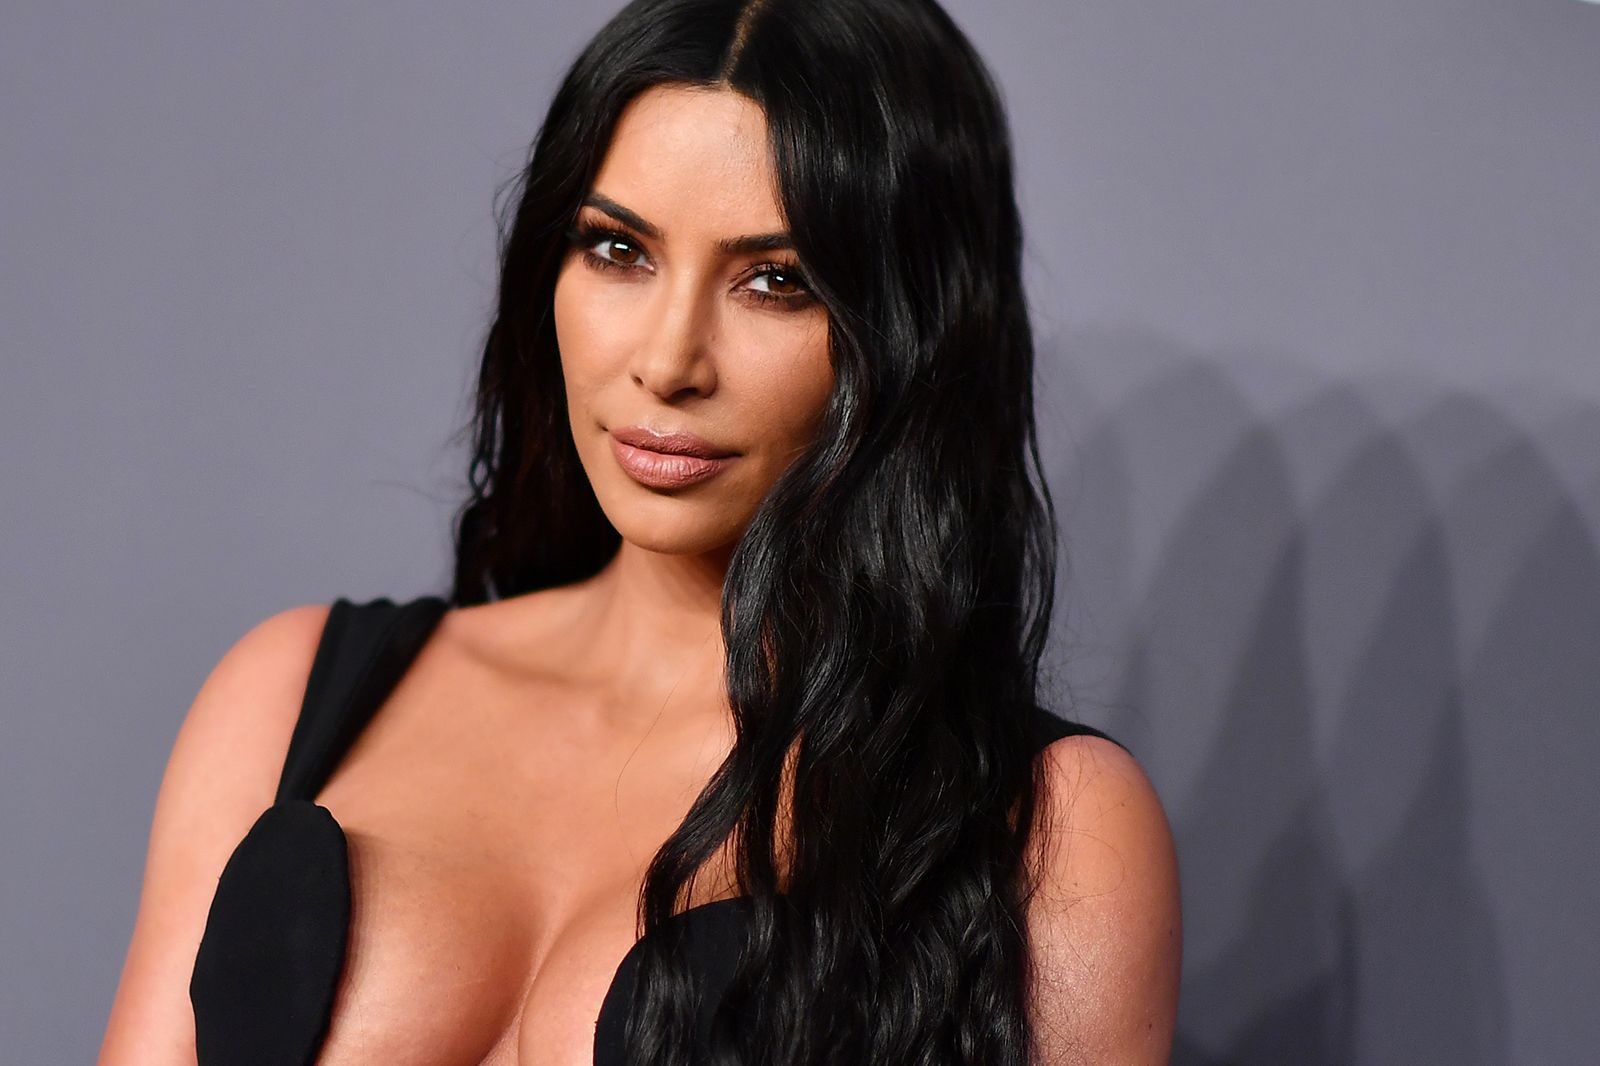 Kim Kardashian's SKIMS brand is designing the official undergarments for  Team USA at the Olympics - The Sauce